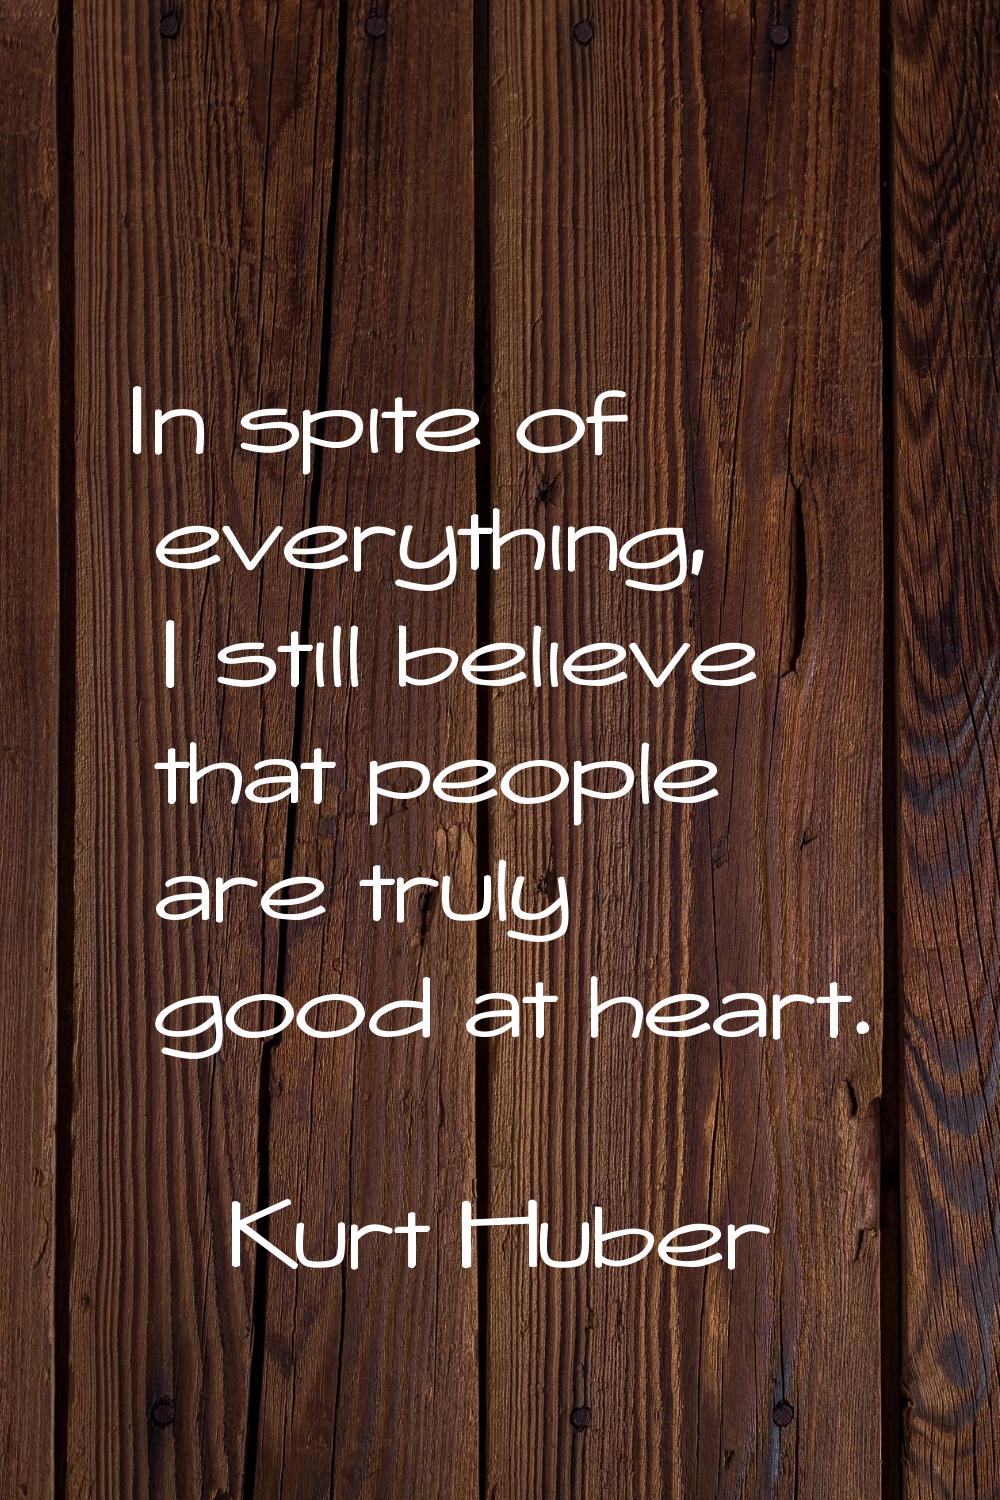 In spite of everything, I still believe that people are truly good at heart.